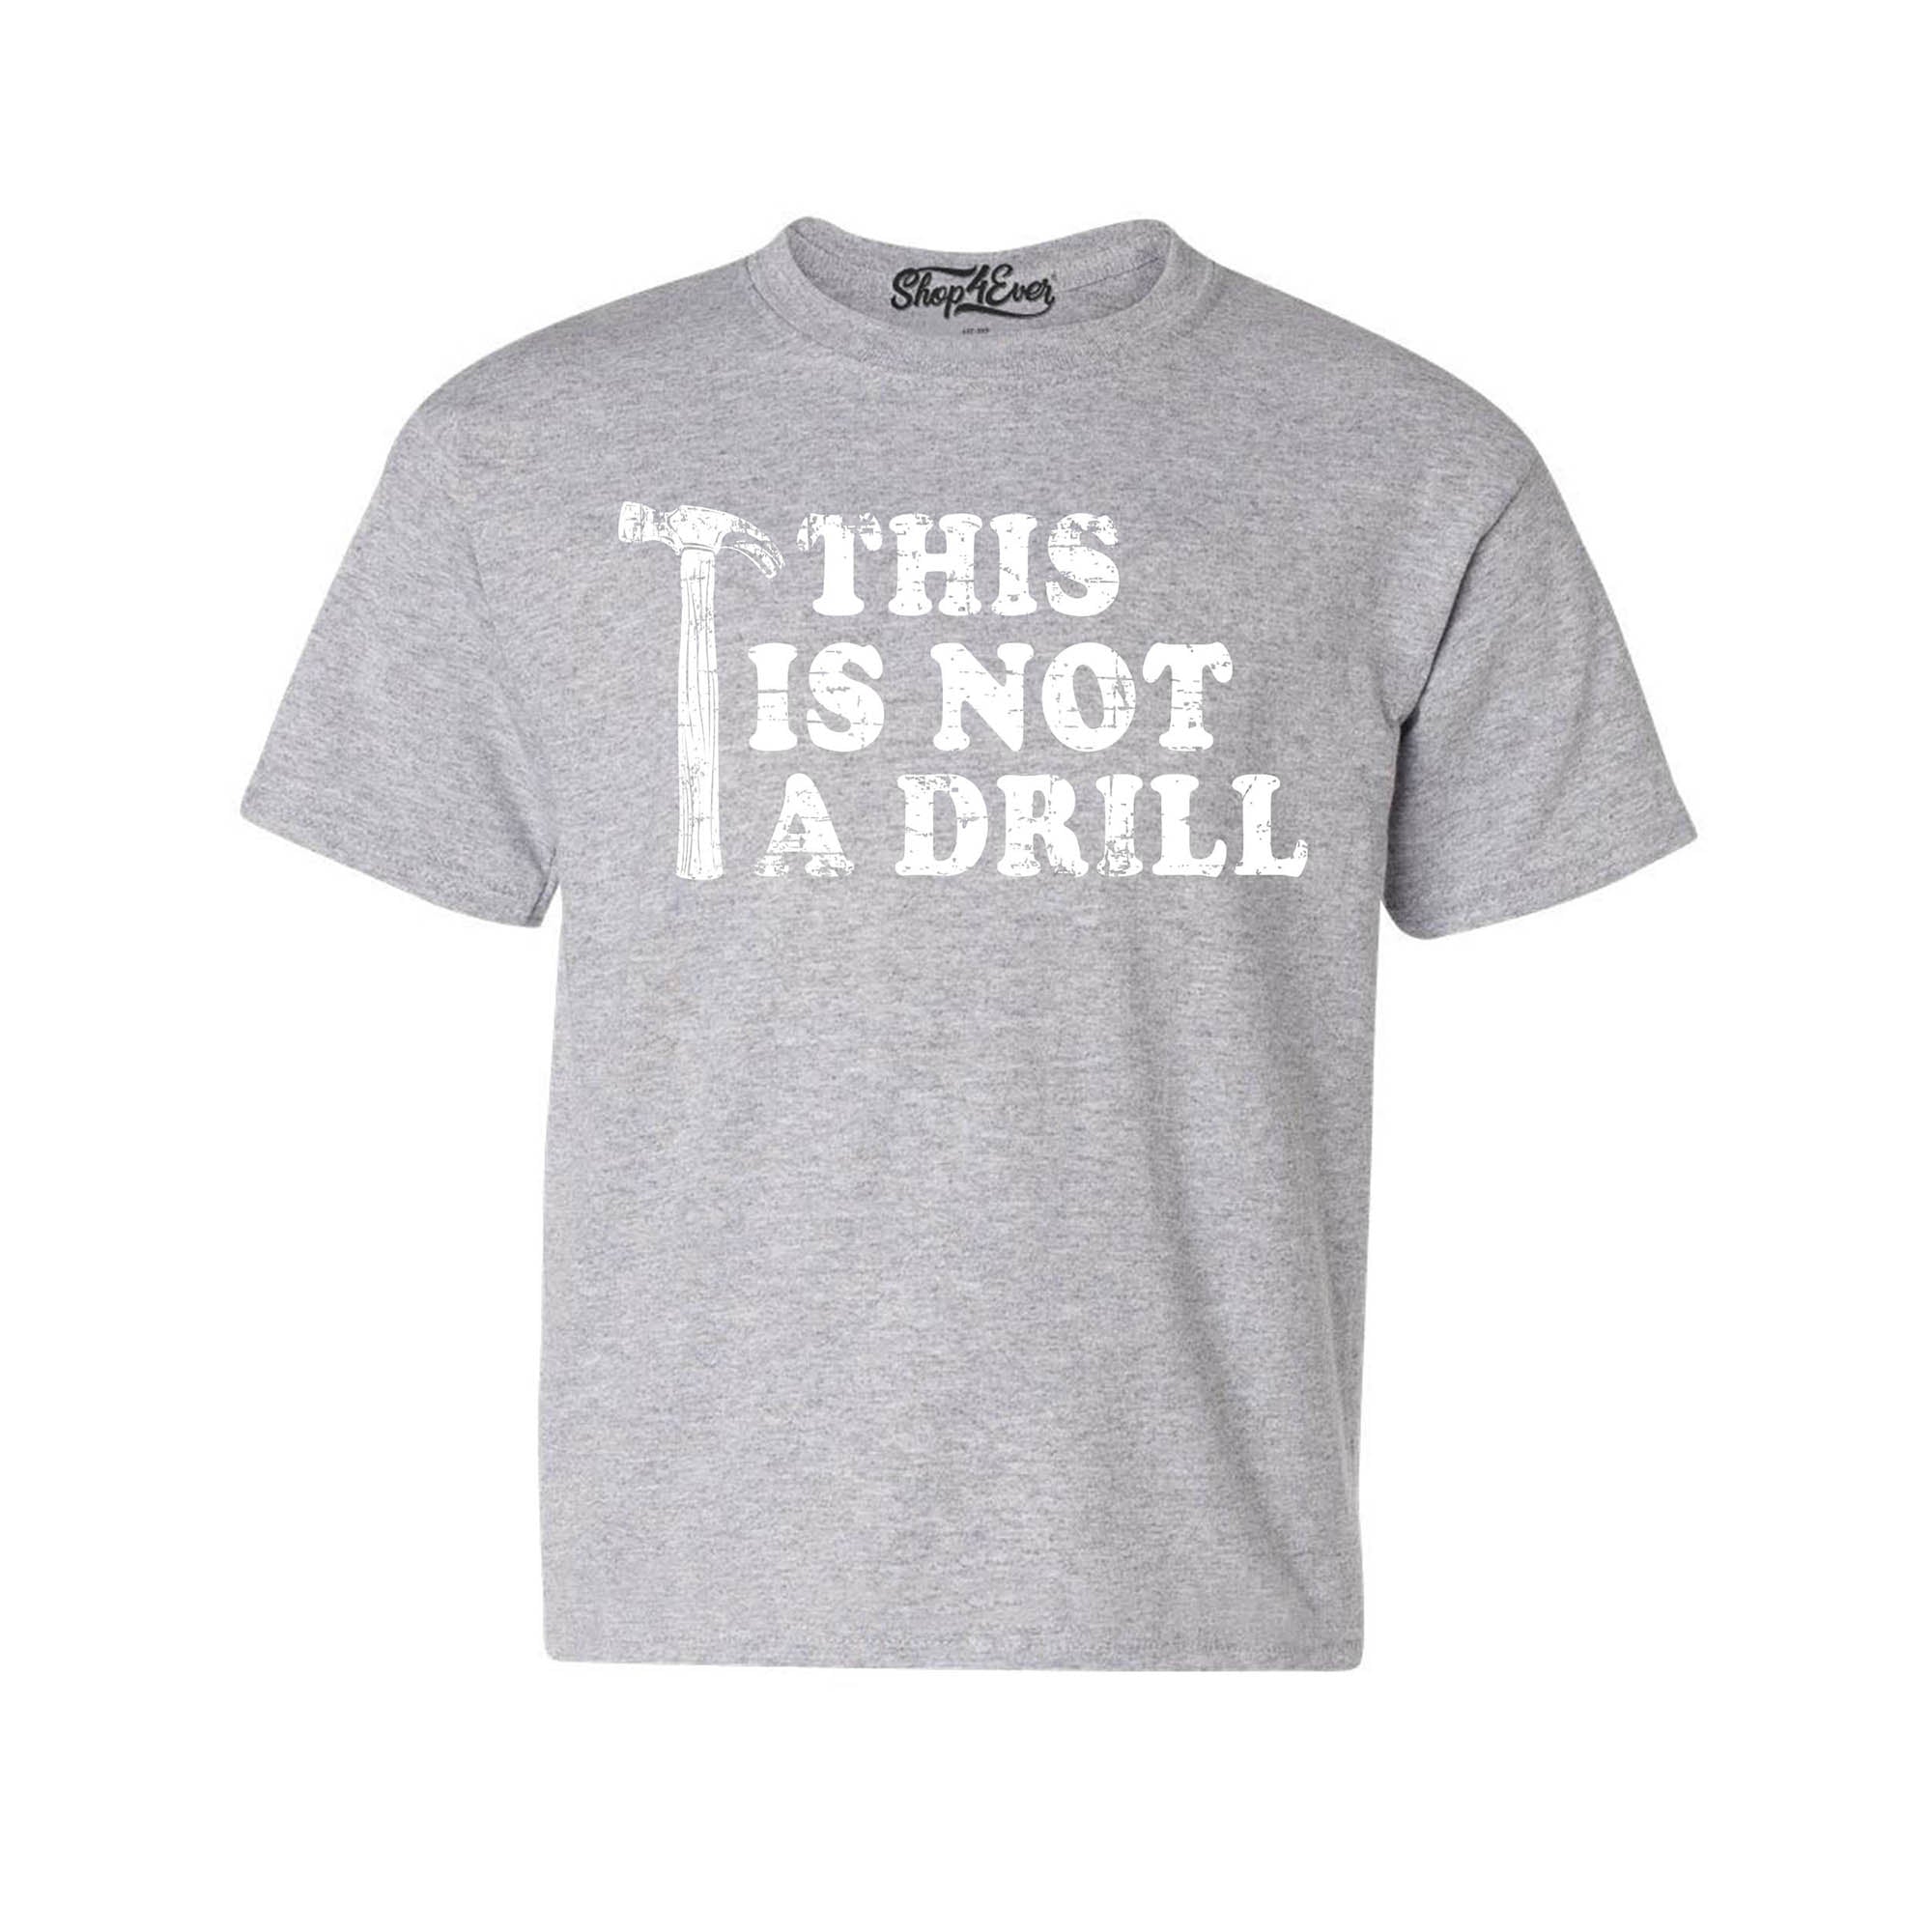 This is Not a Drill Kids Child Funny Youth's T-Shirt